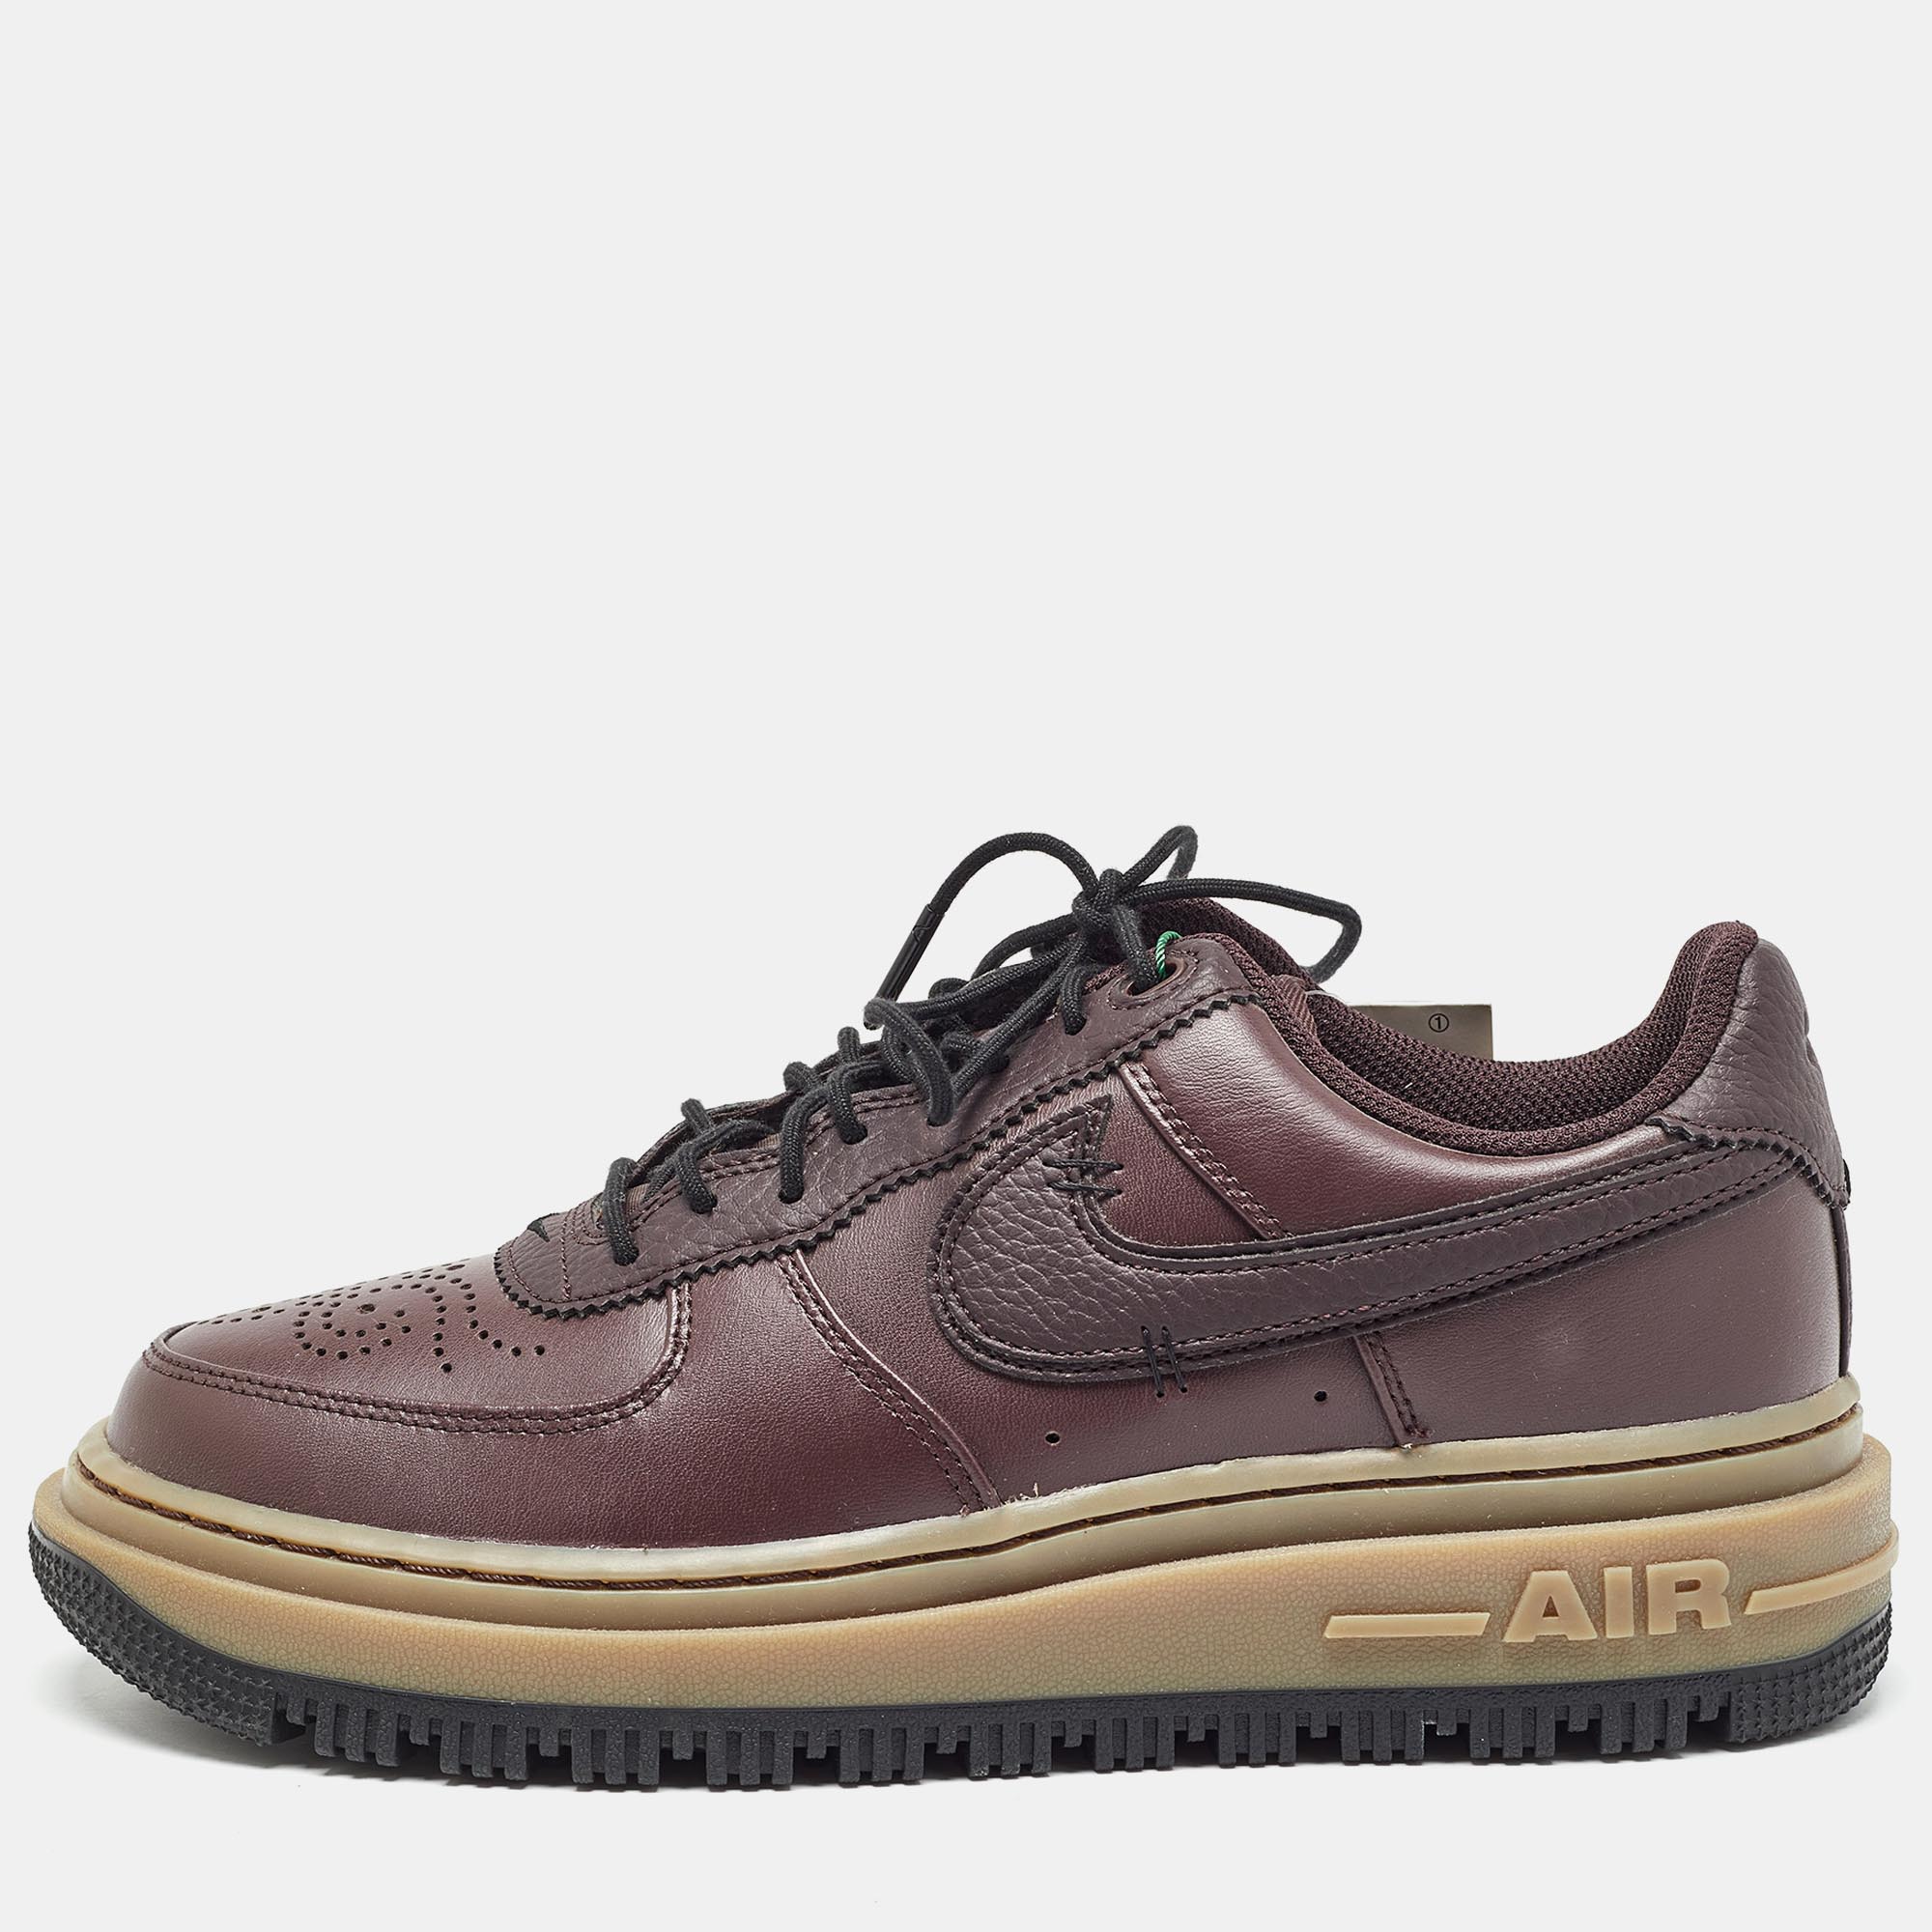 

Nike Air Force 1 Burgundy Leather Air Force 1 Low Luxe Brown Basalt Sneakers Size 40.5